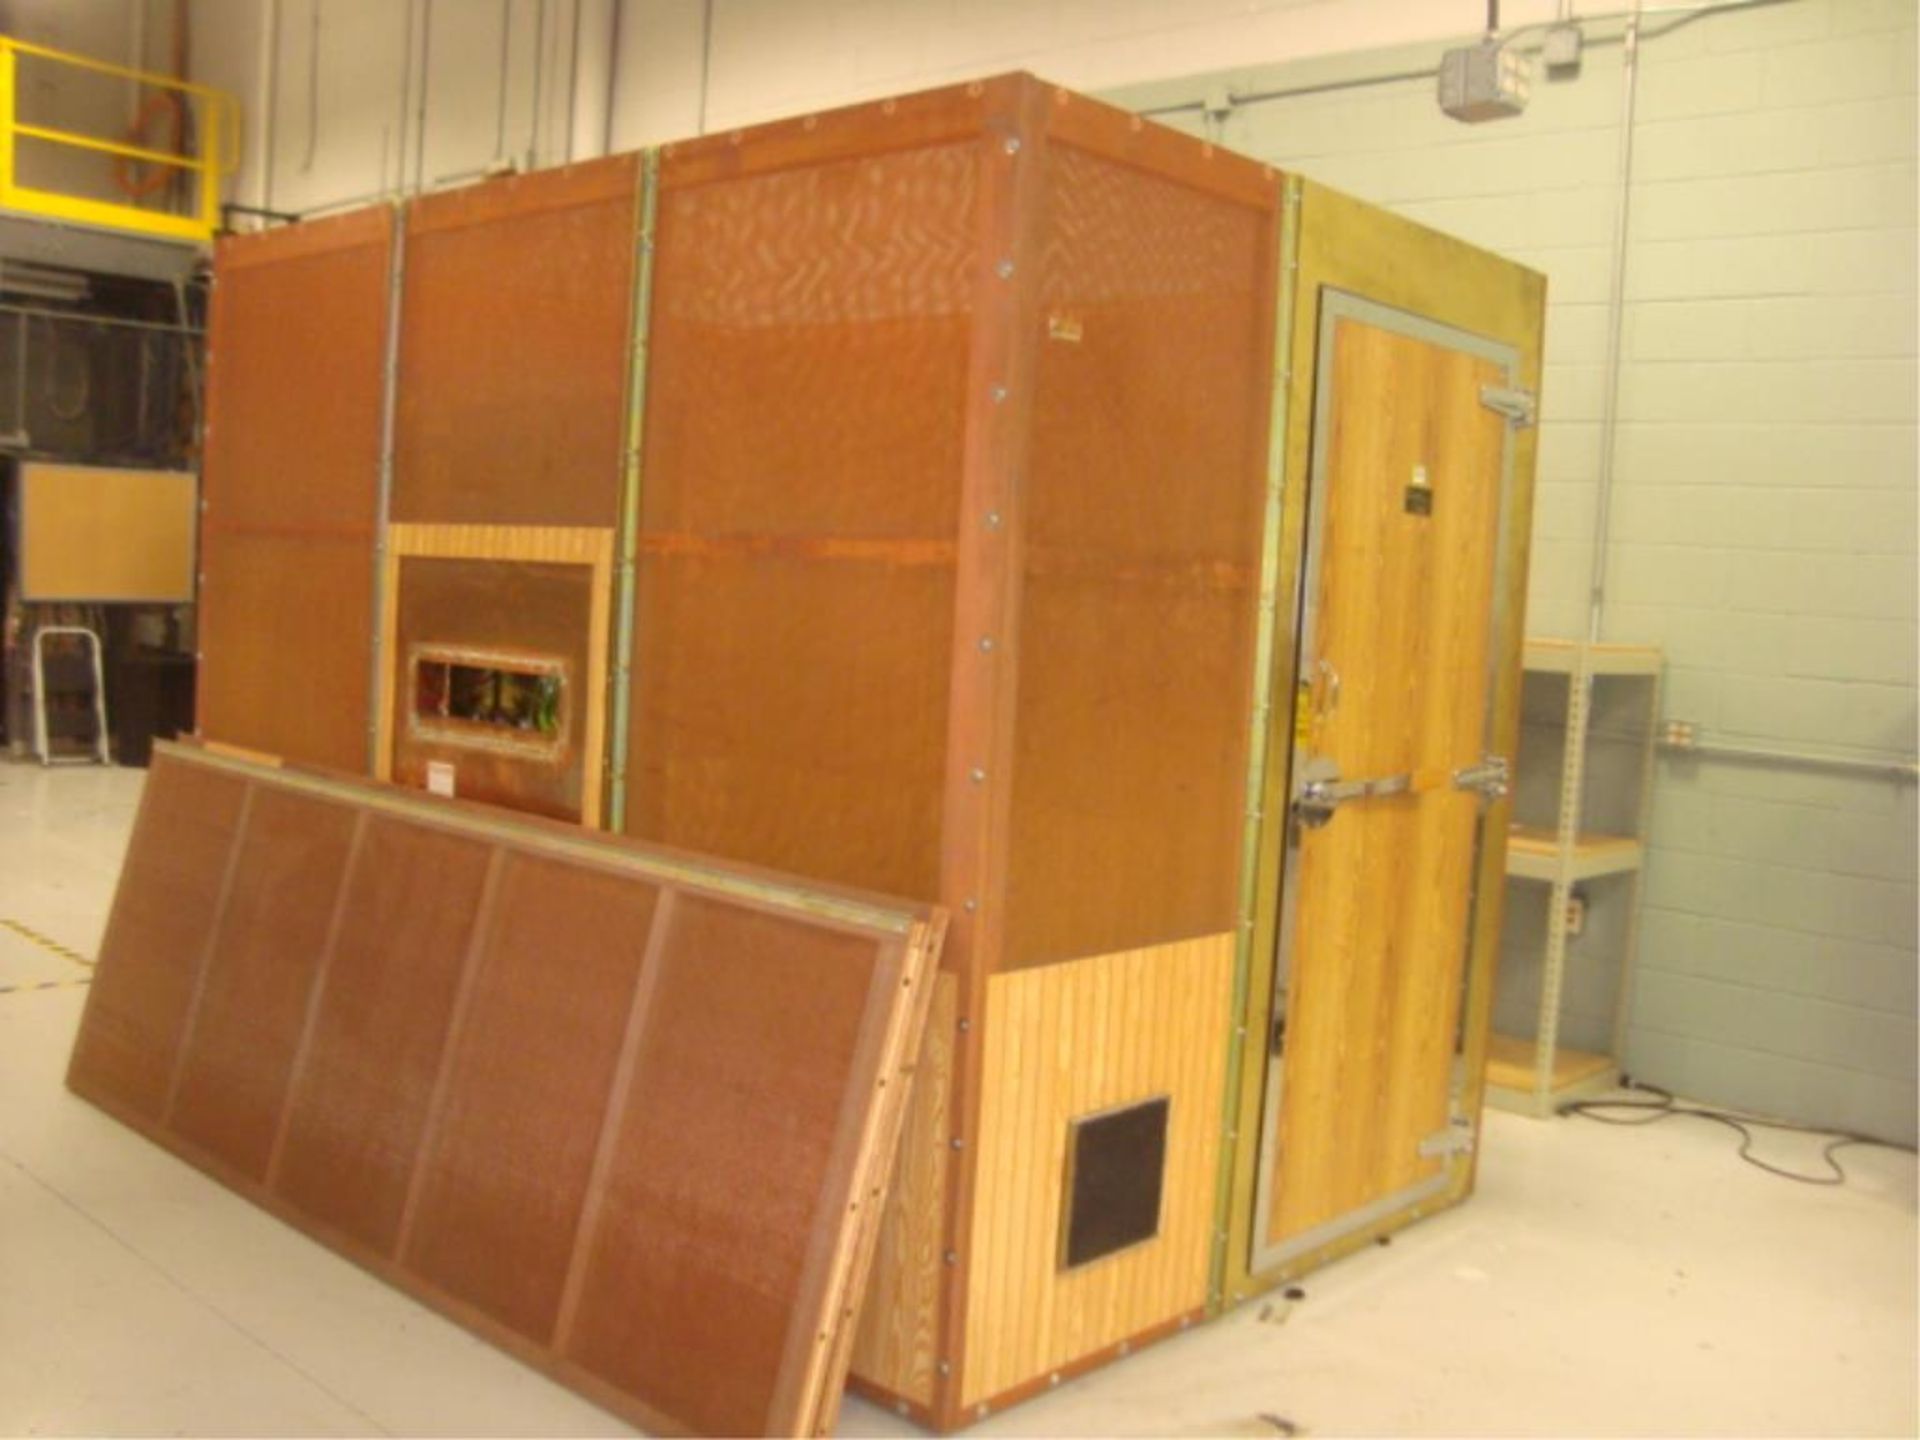 Modular Copper Screened RF Shielded Isolation Room - Image 2 of 17